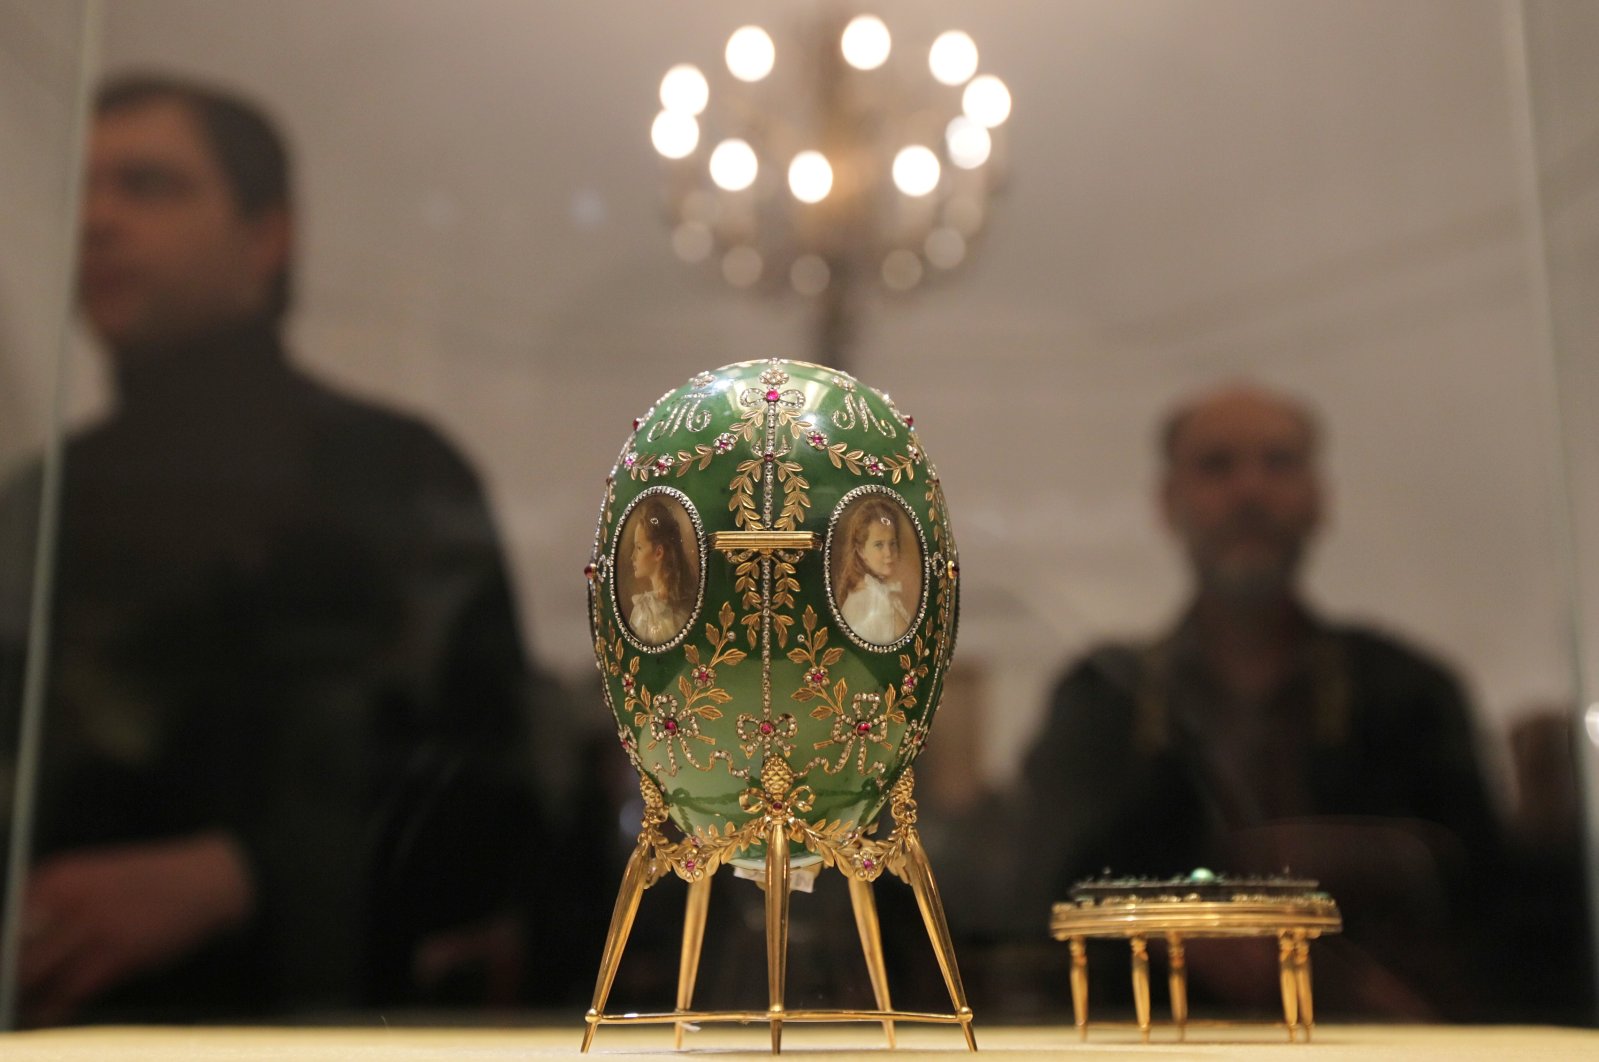 The "Alexander Palace Egg" made under the supervision of Peter Carl Faberge is displayed during the exhibition "Carl Faberge and Masters of stone carving" at the Moscow Kremlin Museums, in Moscow, Russia, April 6, 2021. (EPA Photo)